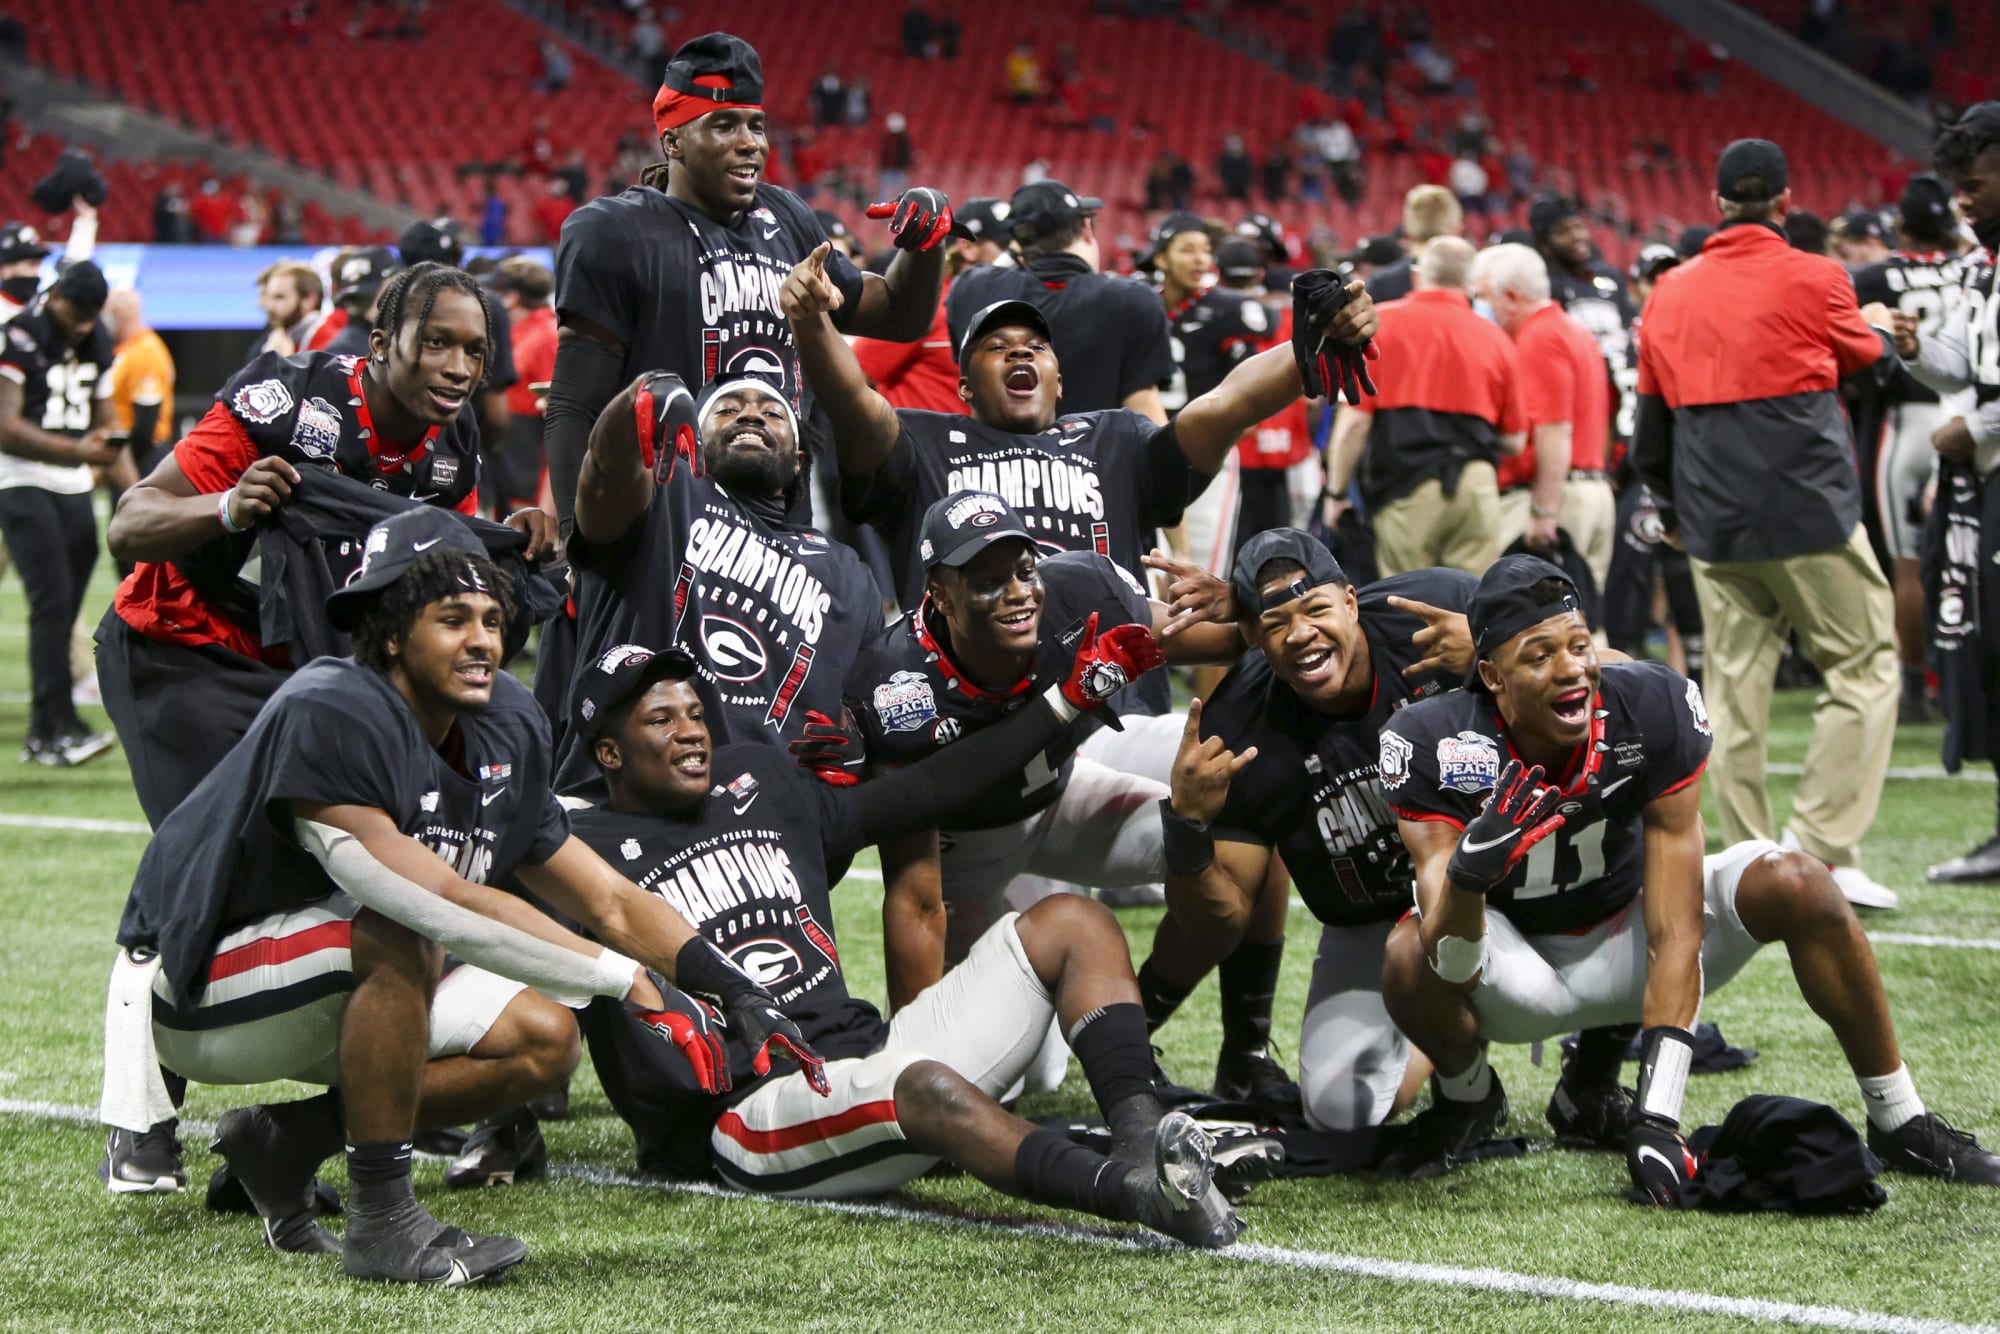 Football Bulldogs hope to end national championship drought